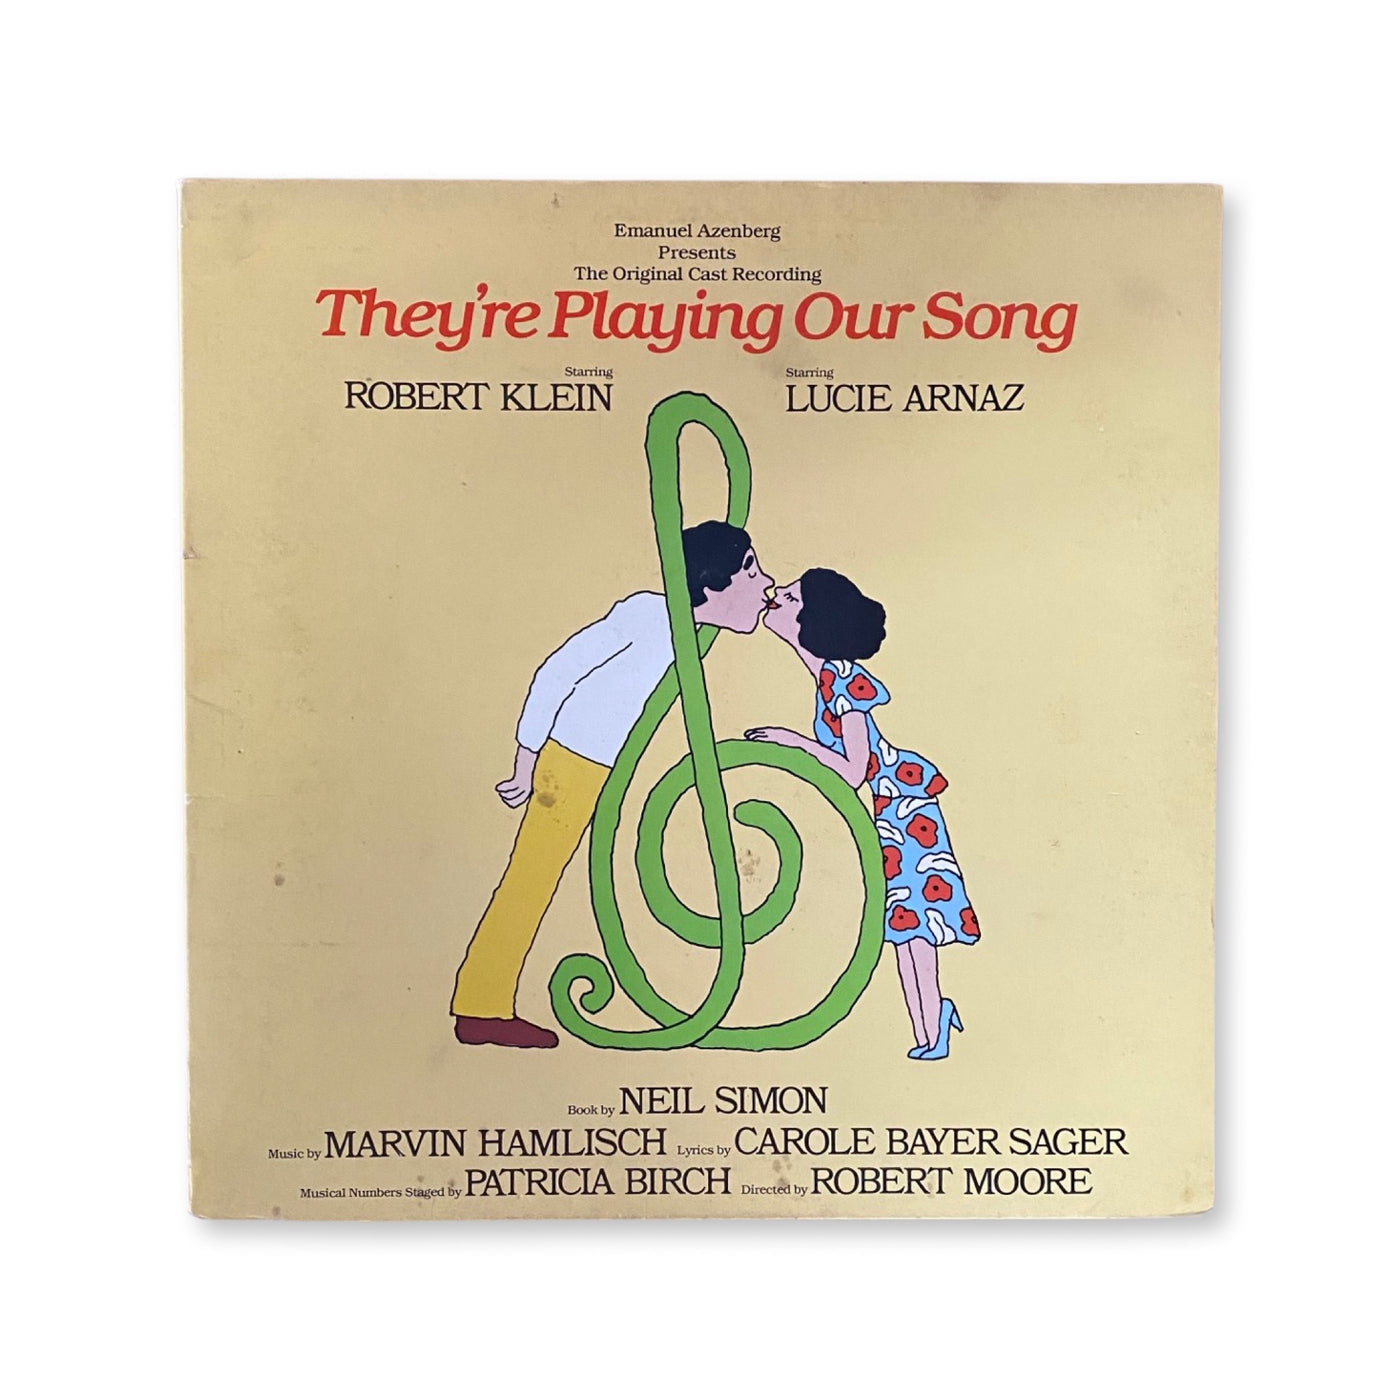 Robert Klein, Lucie Arnaz - Emanuel Azenberg Presents The Original Cast Recording "They're Playing Our Song"